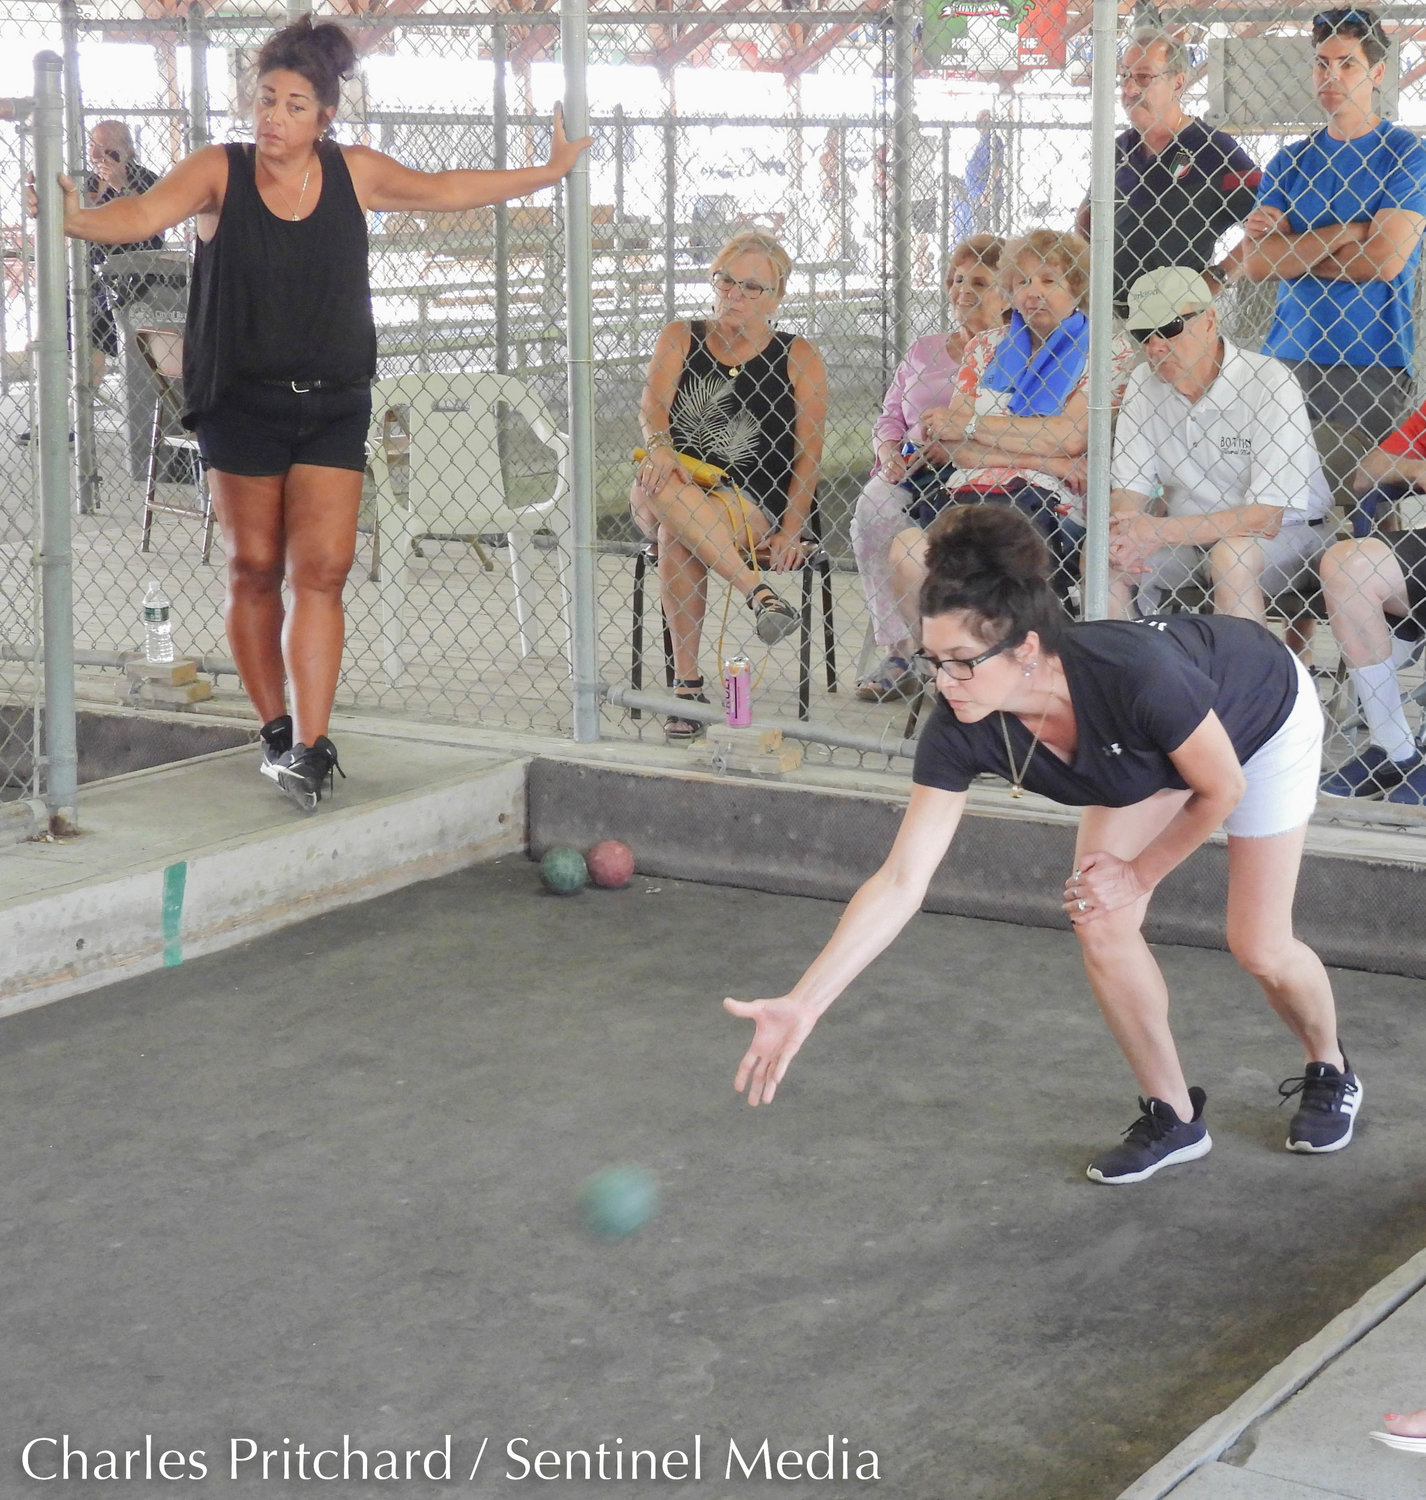 Finalists Toccolana Club and Viviani Law Firm compete in the women's division of the 47th World Series of Bocce Sunday at sun-drenched Toccolana Club in Rome.